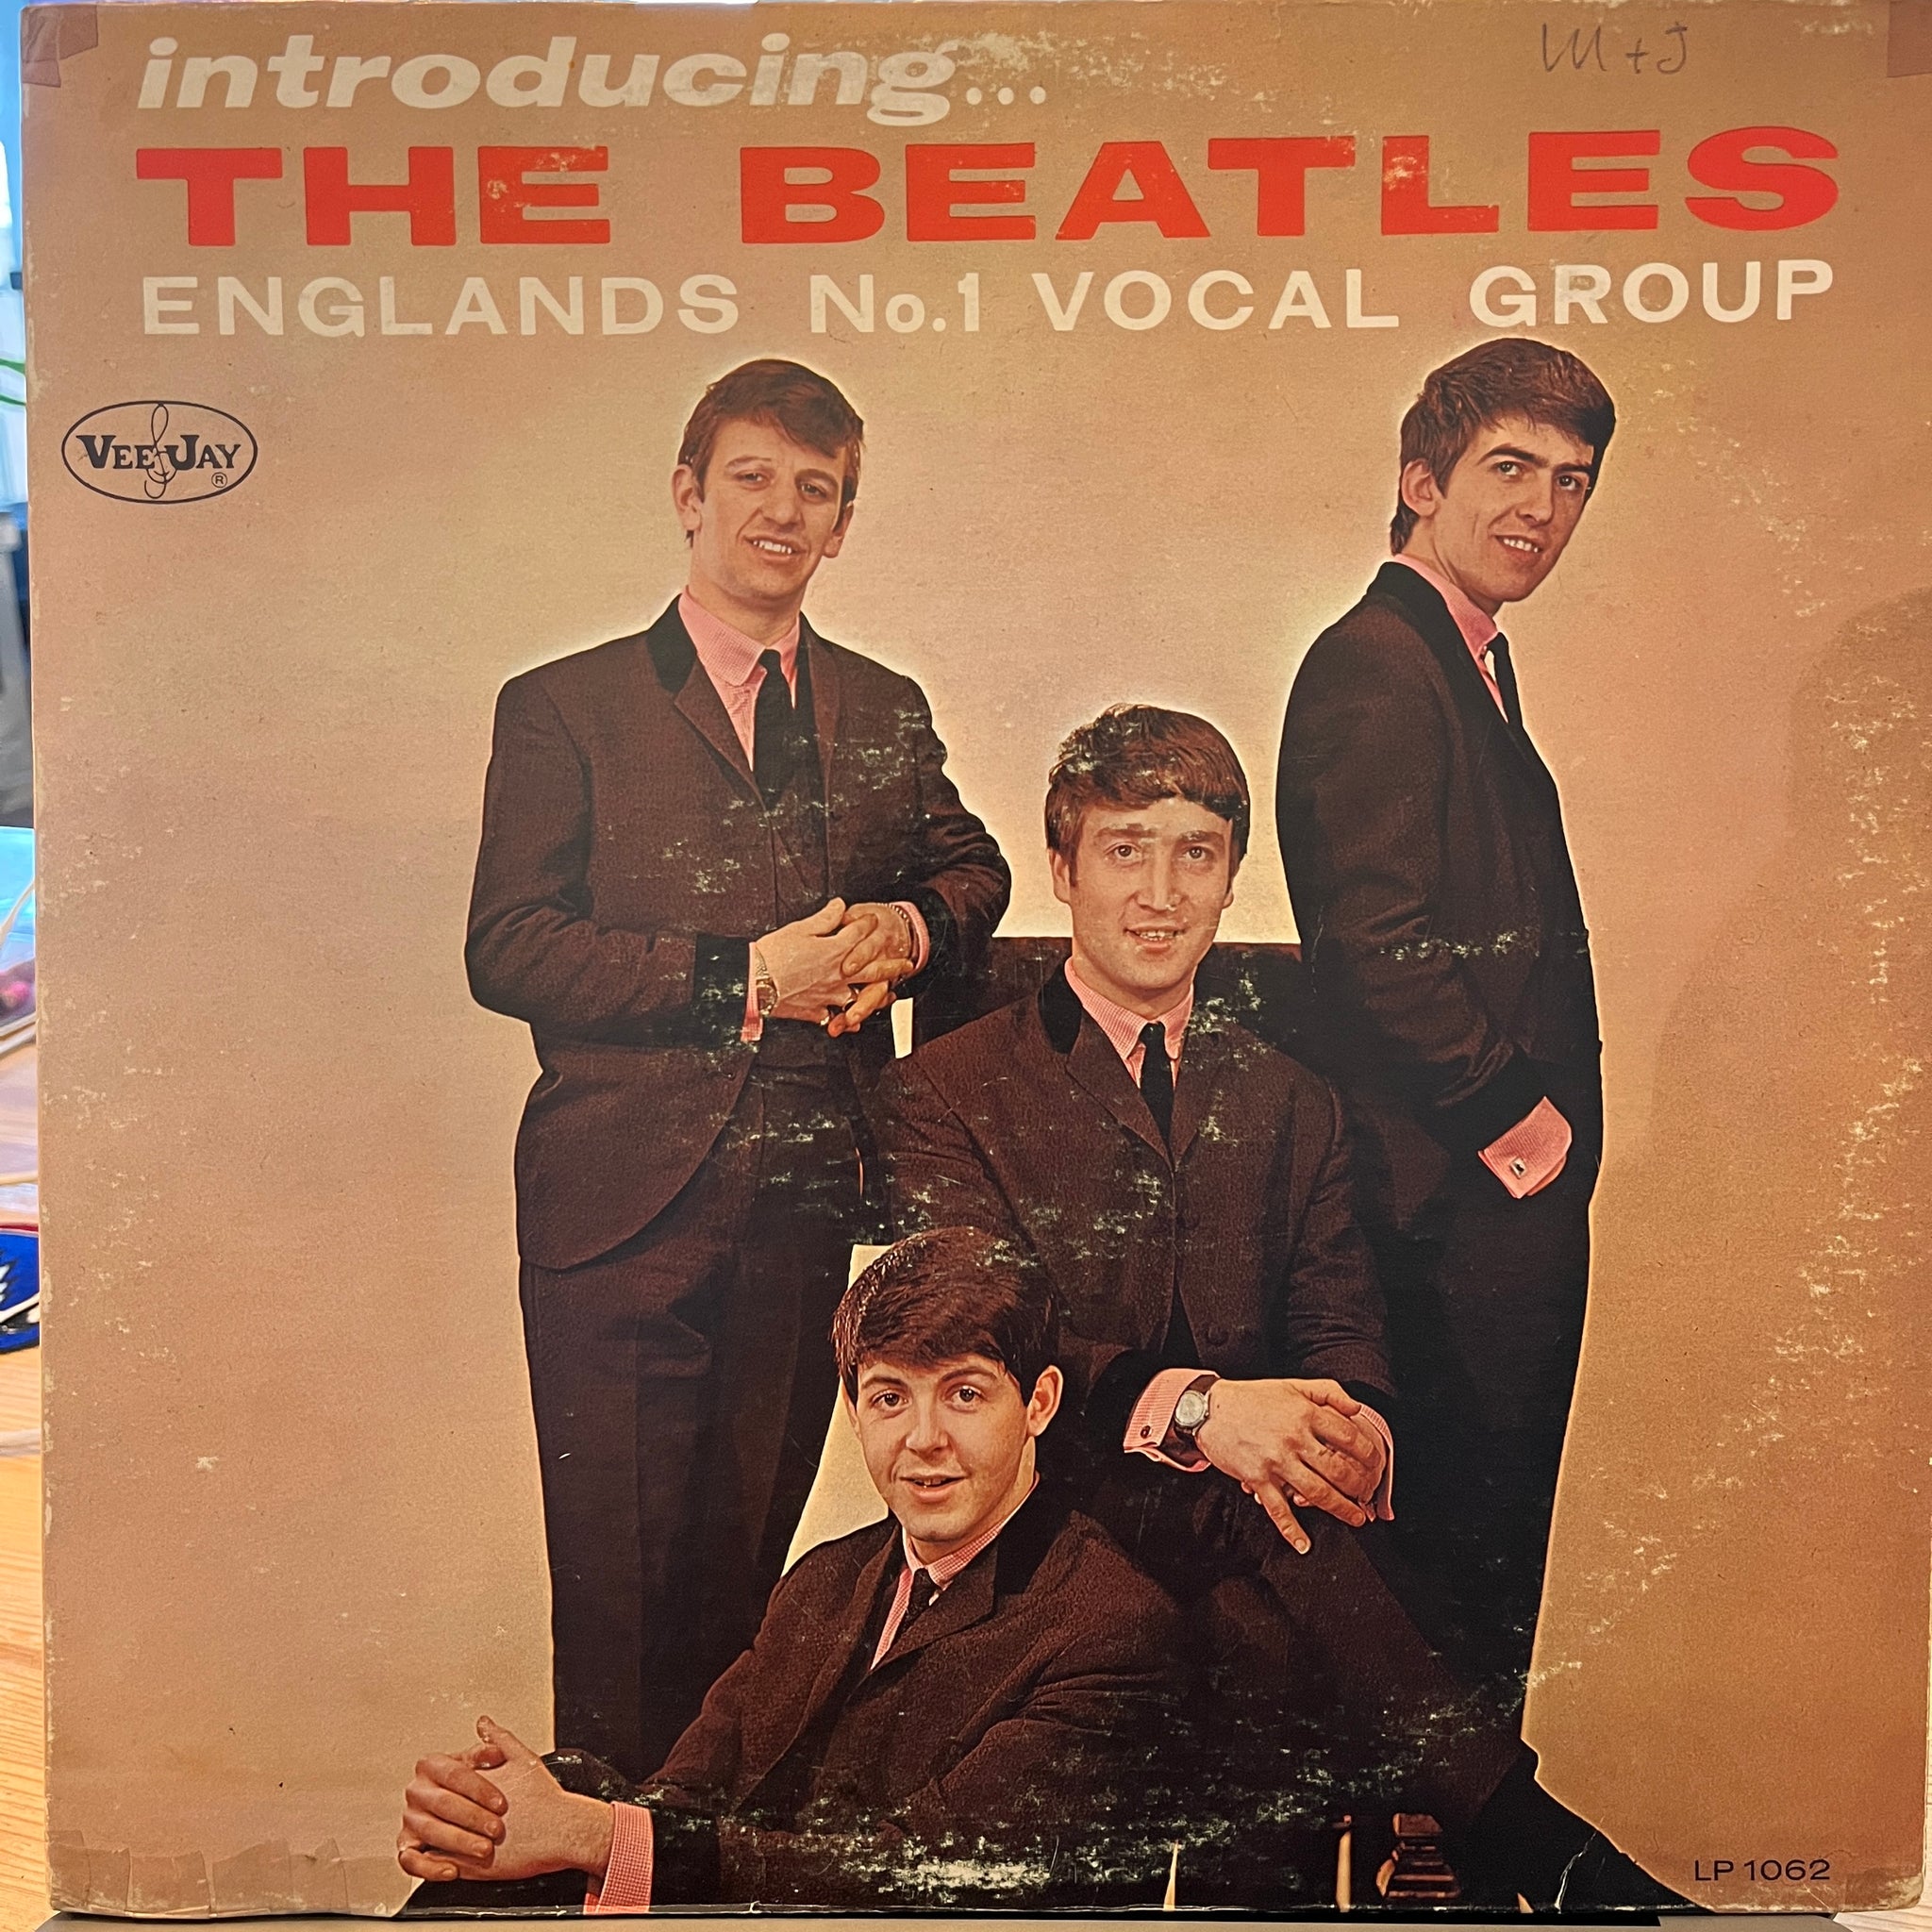 BEATLES, THE - INTRODUCING... - 1964 mono